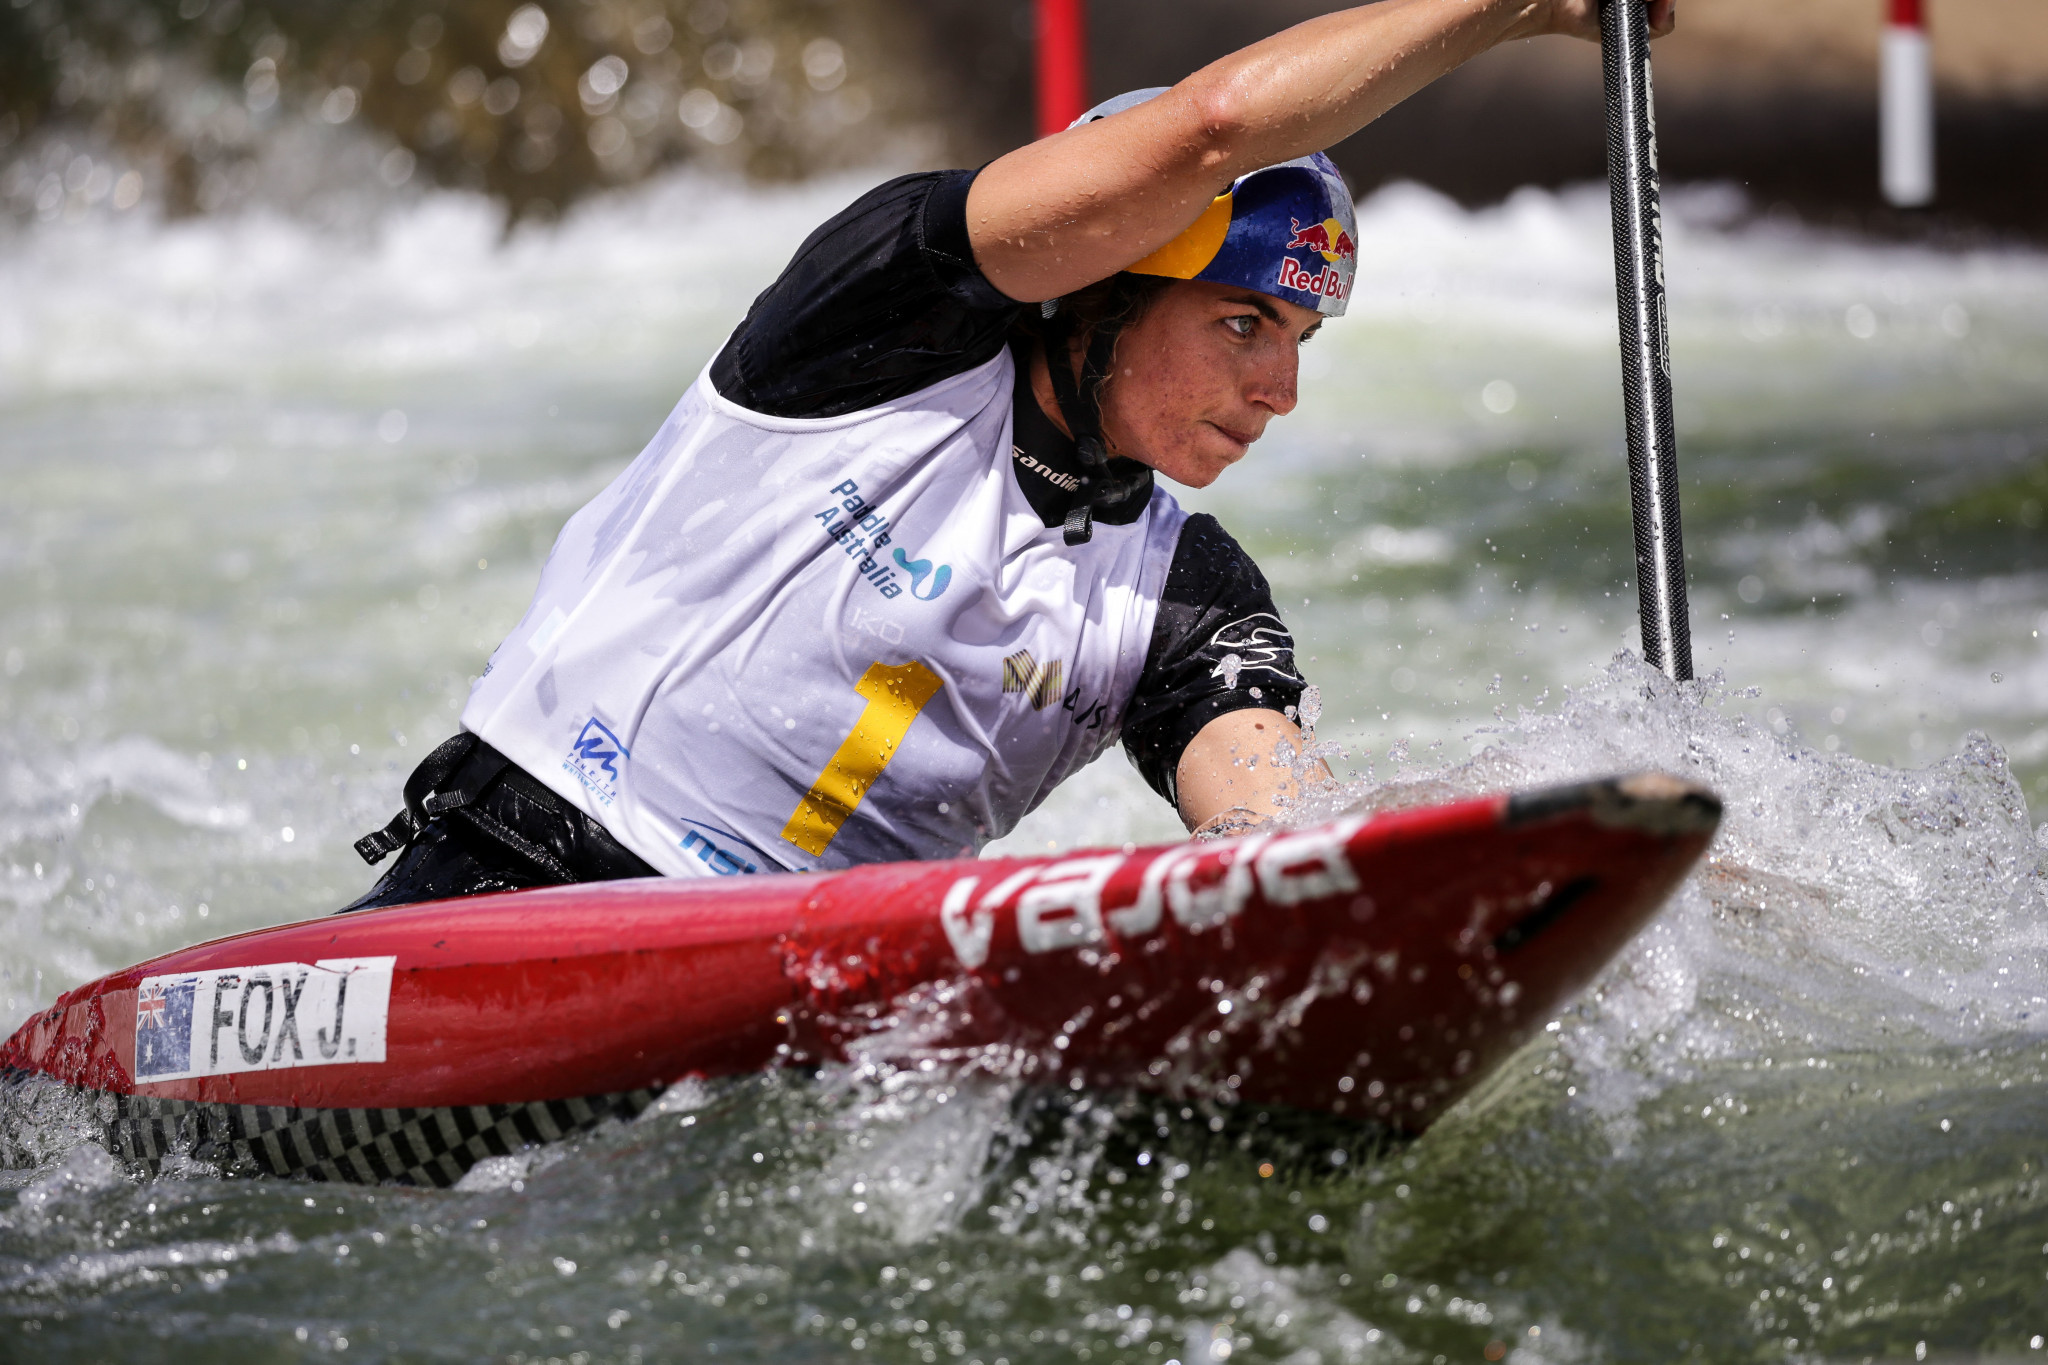 World champion Fox dominates qualifying in front of home crowd at Oceania Canoe Slalom Championships